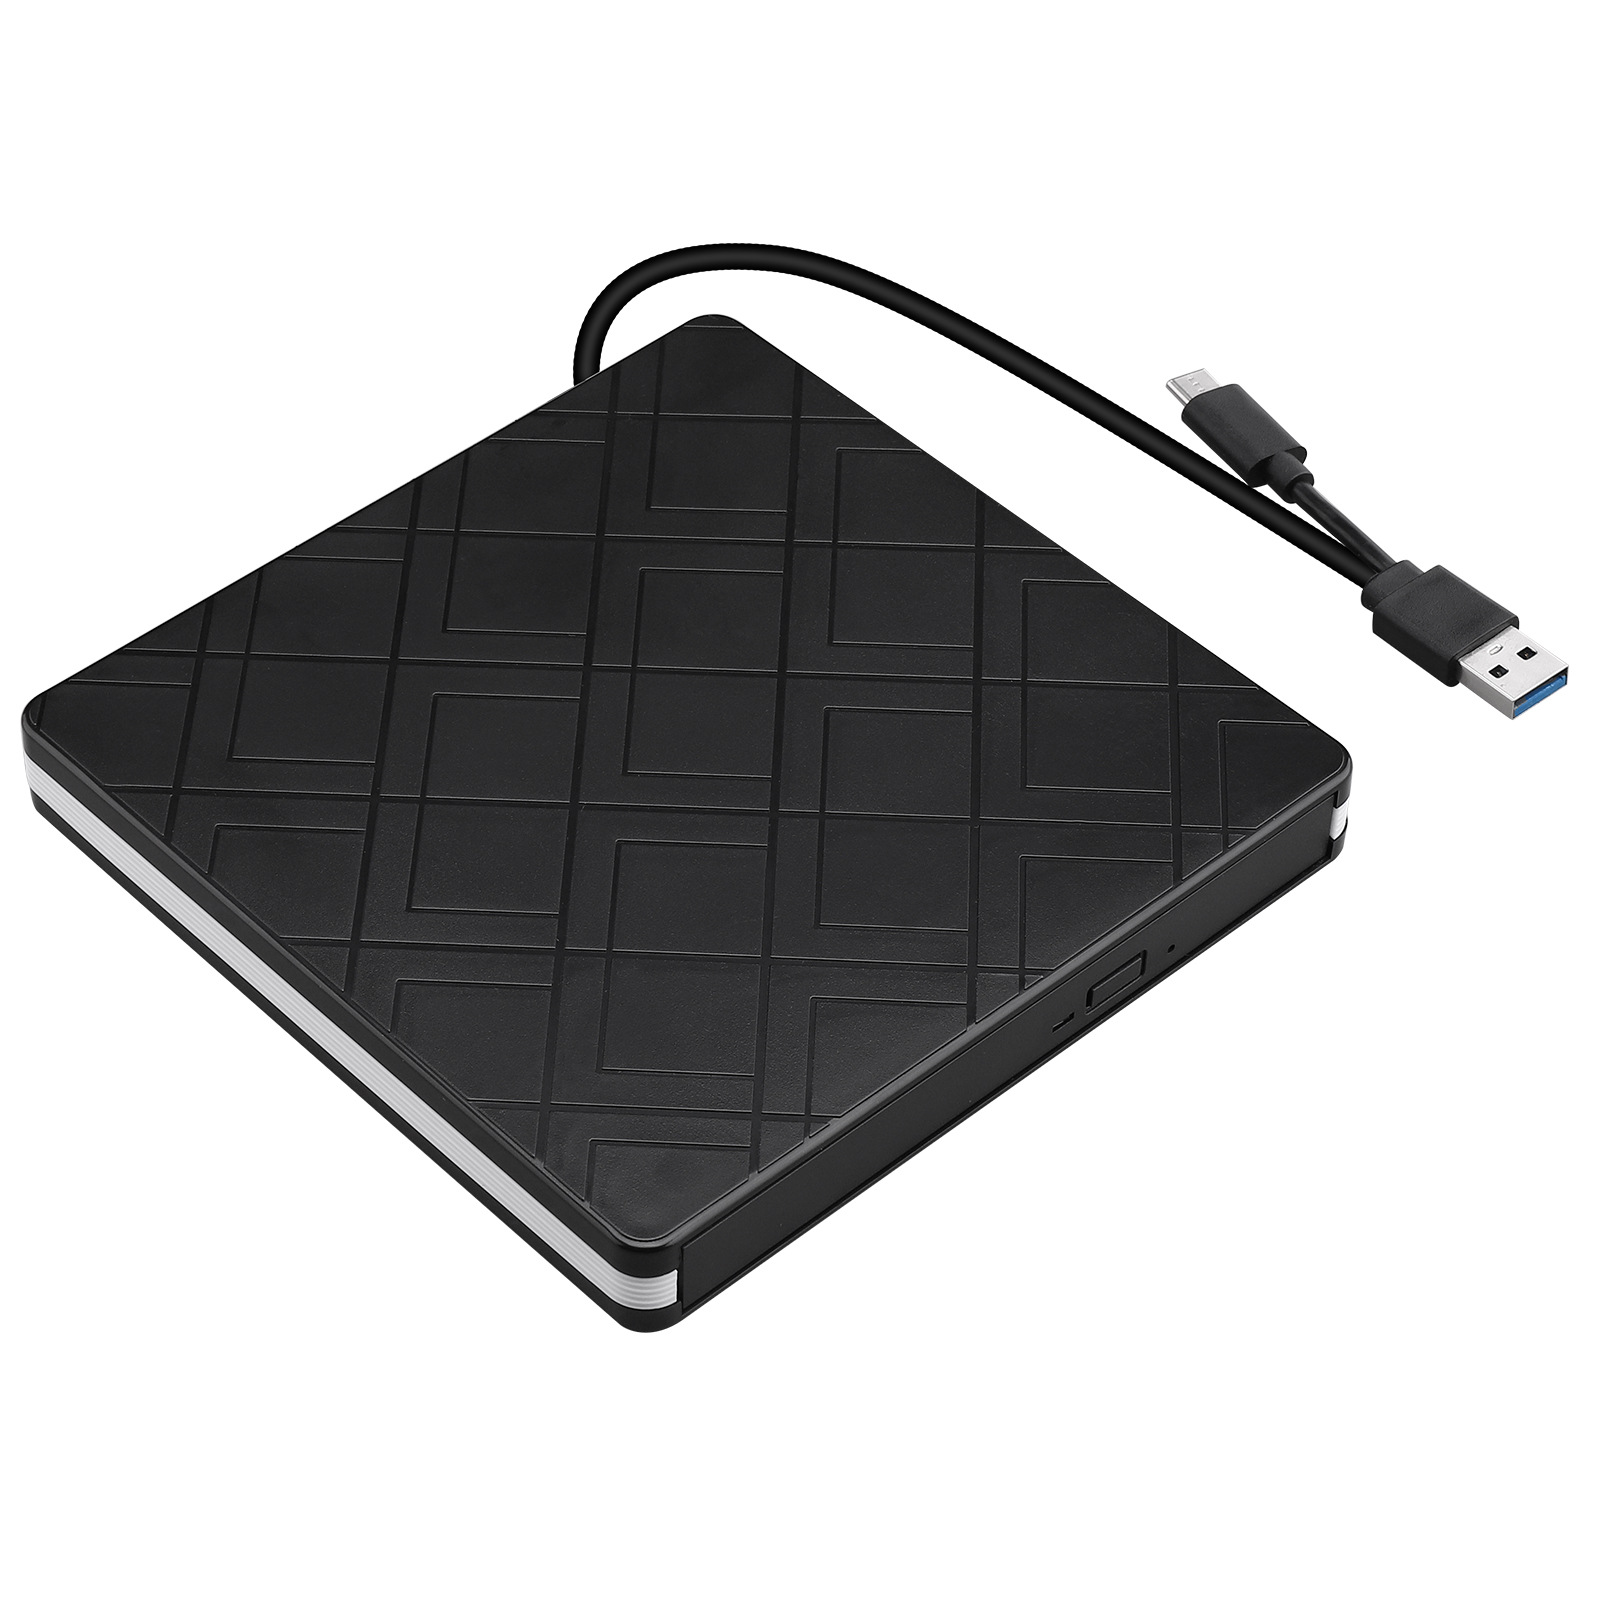 Cmaos-USB30-Type-C-External-Optical-Drive-CDDVD-Player-Burner-for-PCNotebook-in-HomeOutdoorWork-1748748-4